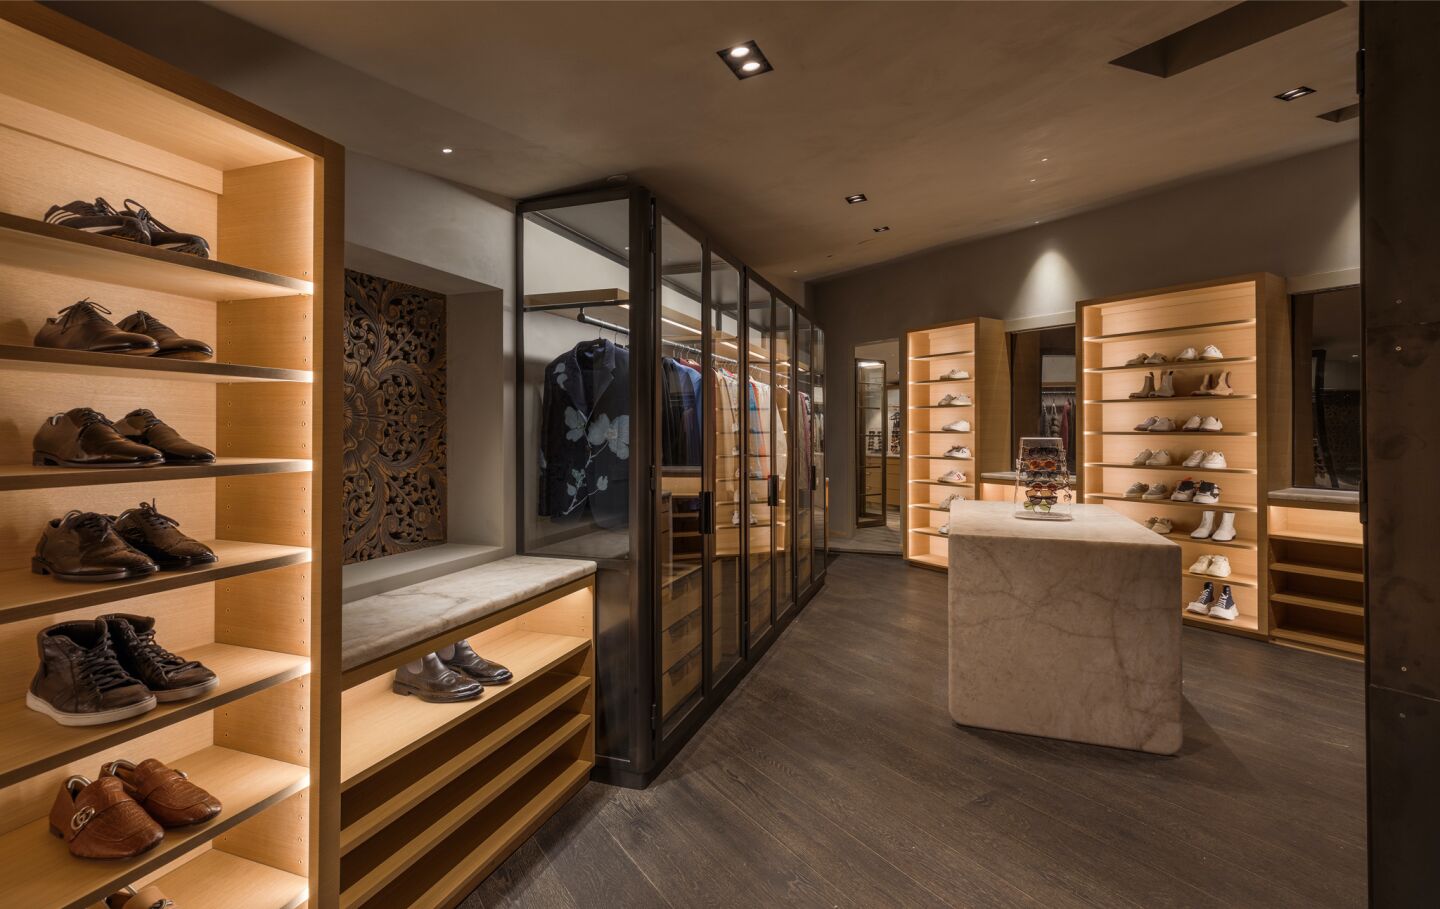 The walk-in closet has many shelves for shoes and other accessories.